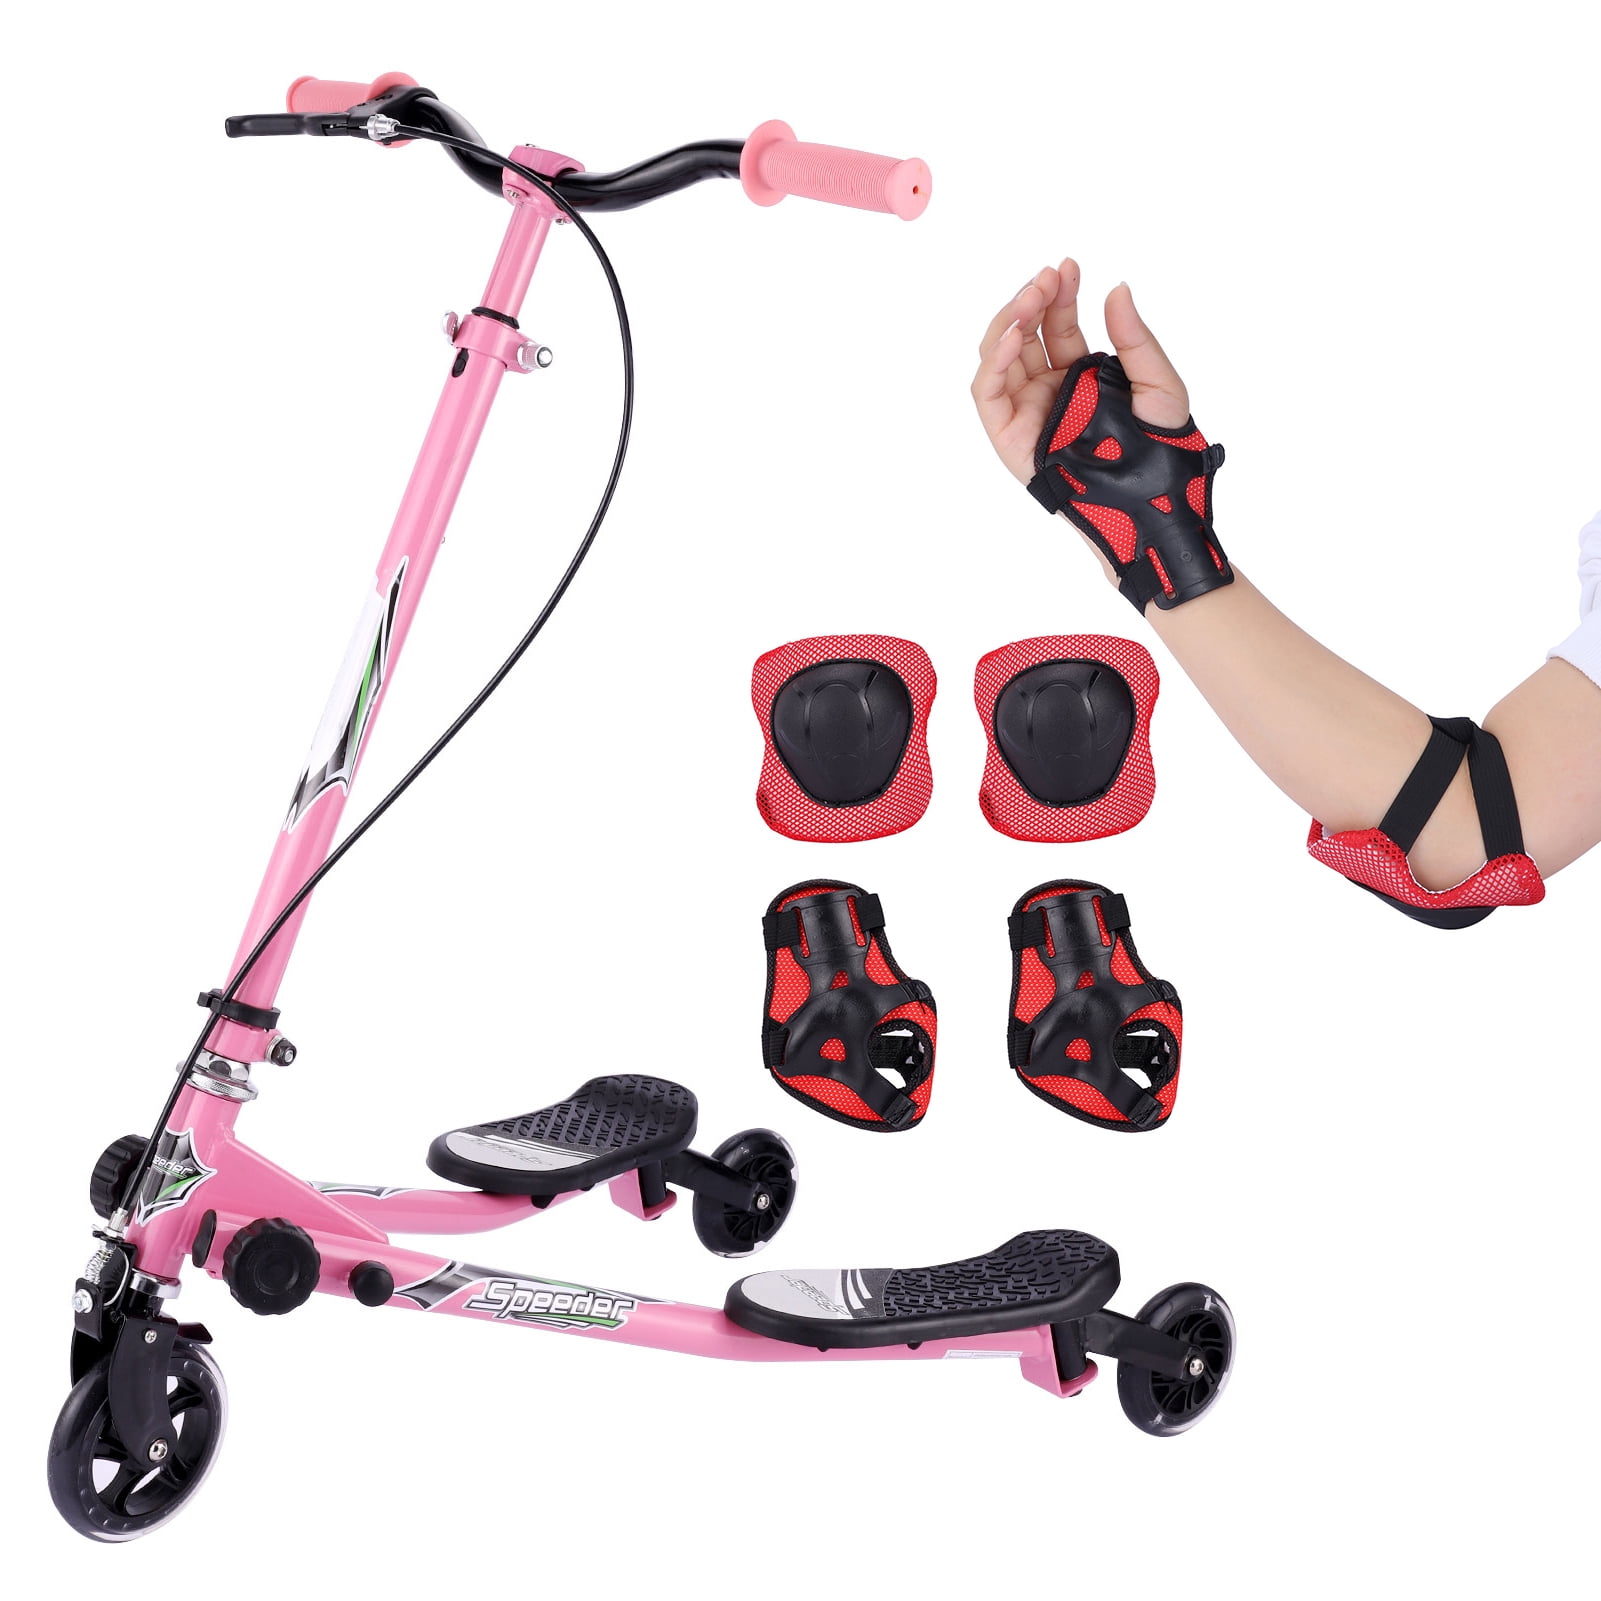 Details about   Adjustable Aluminum Alloy Kick Scooter Height Best Gifts for Children USA e 24 